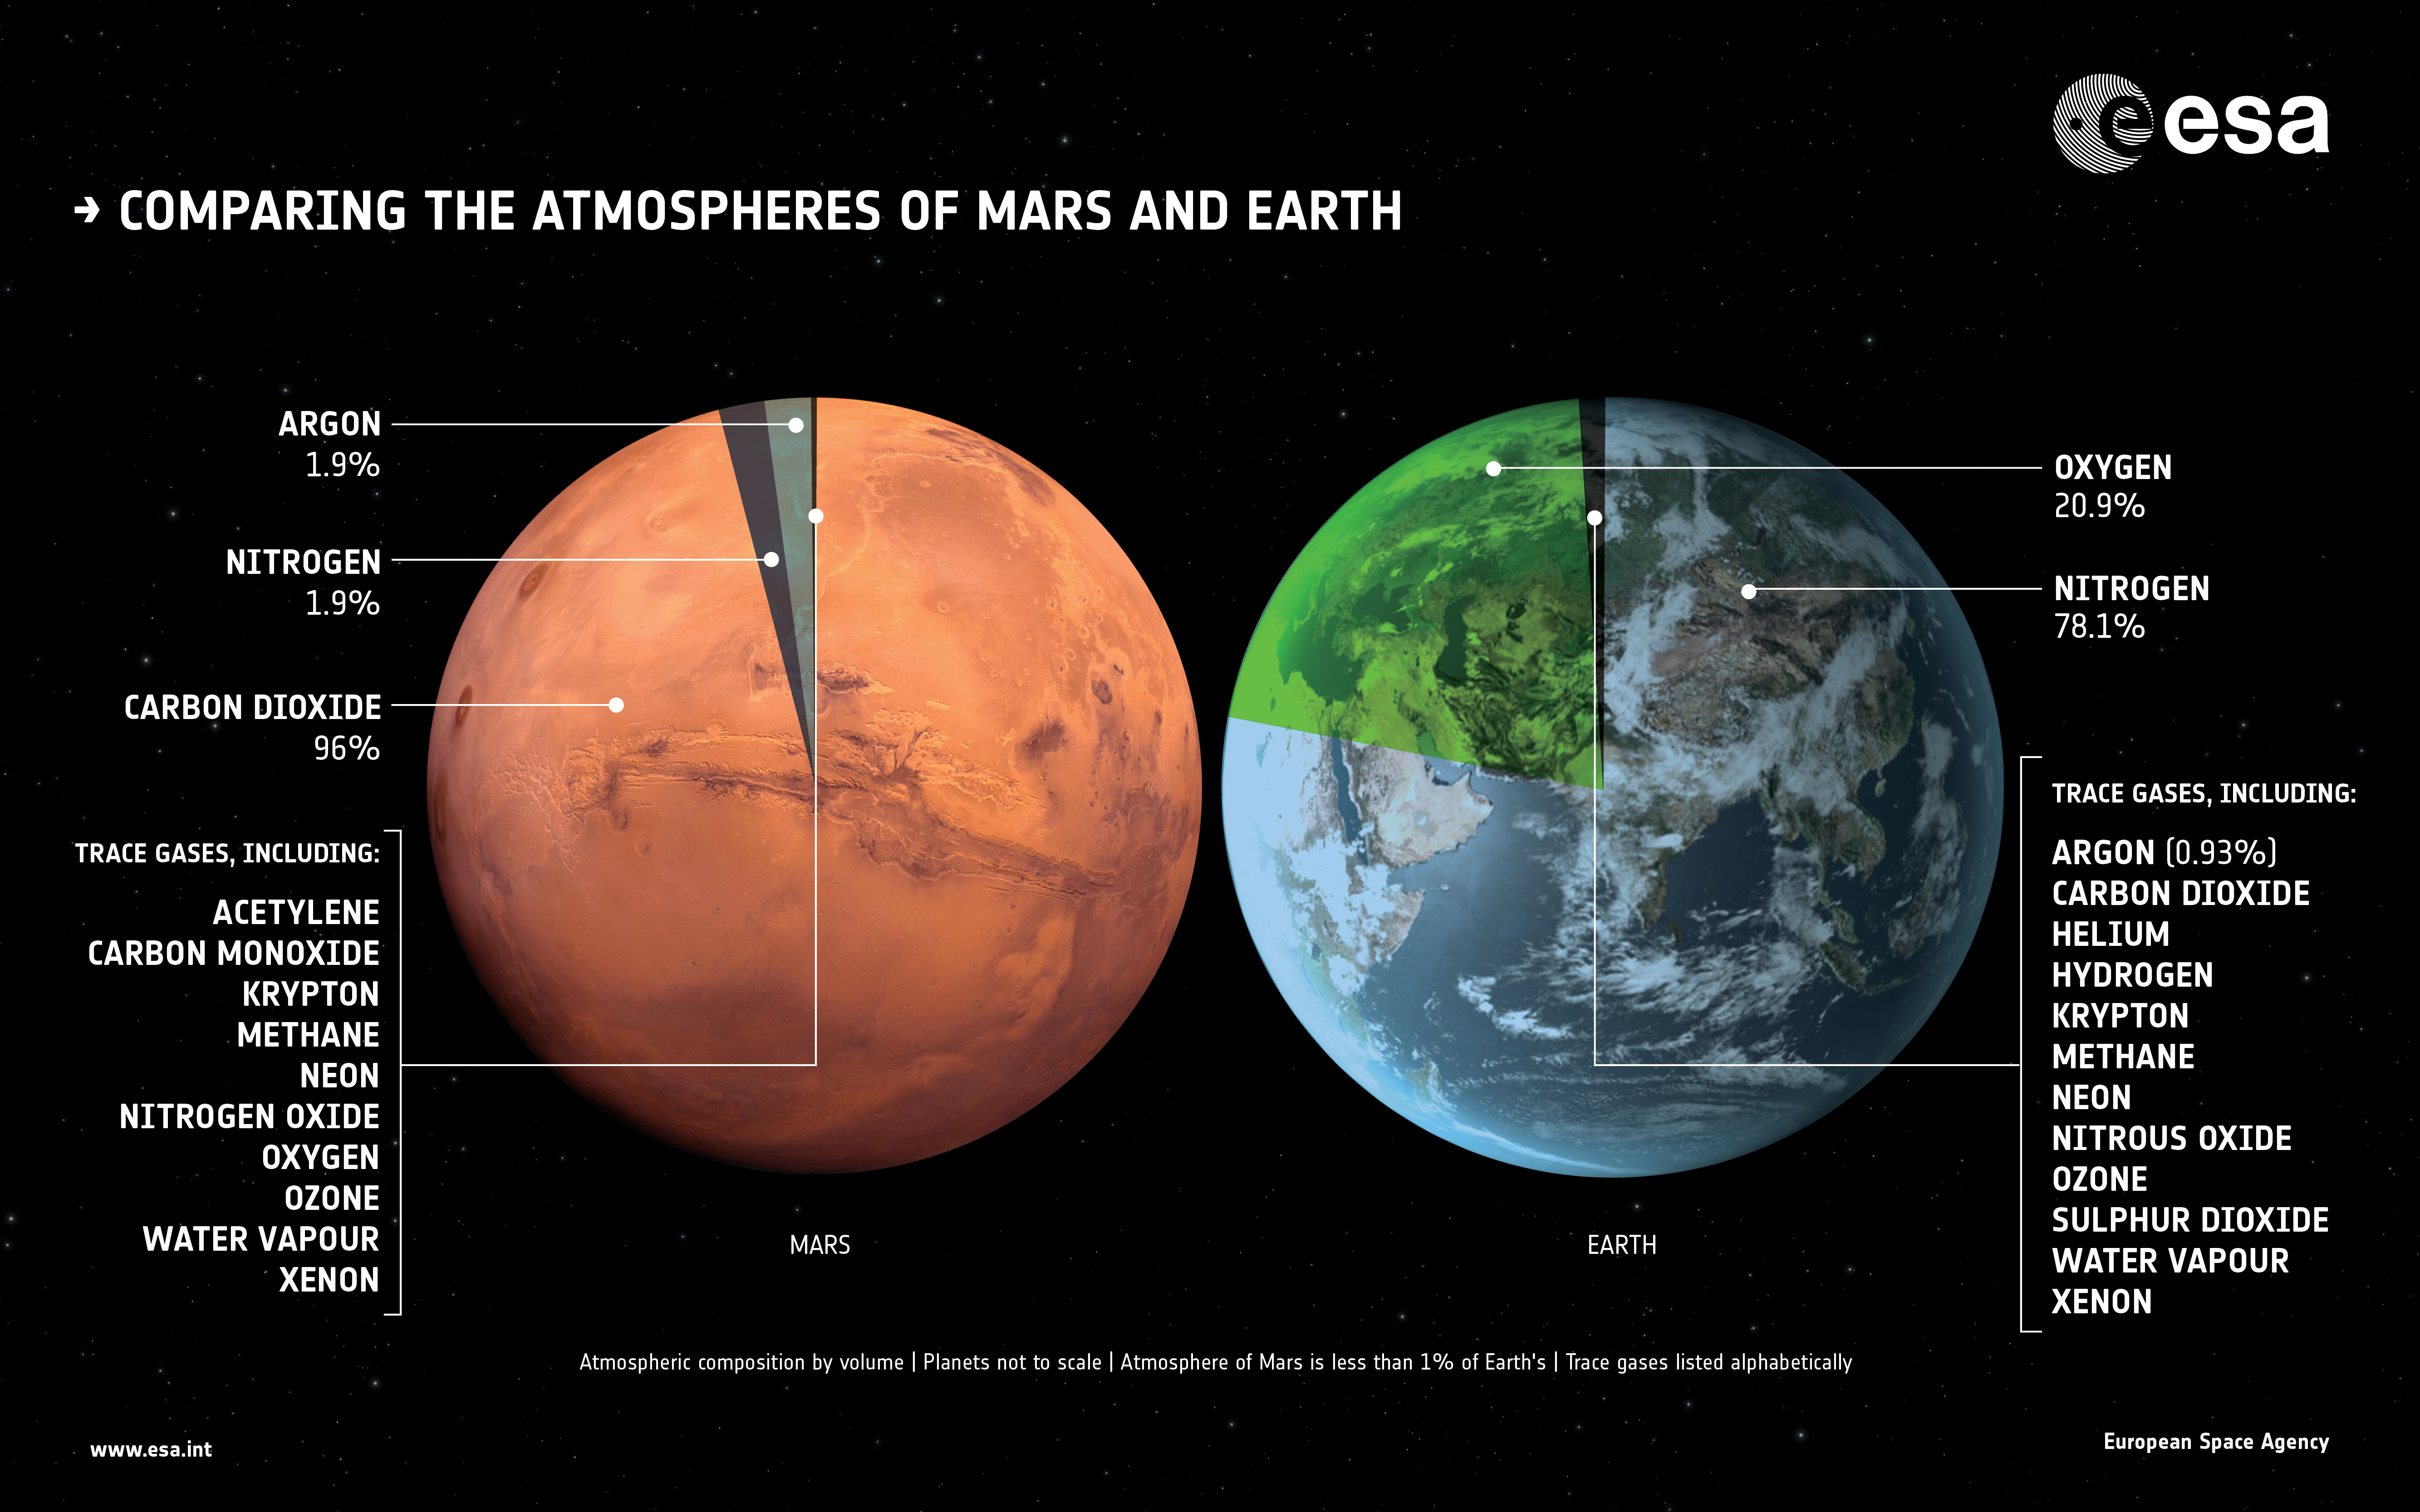 esa-comparing-the-atmospheres-of-mars-and-earth